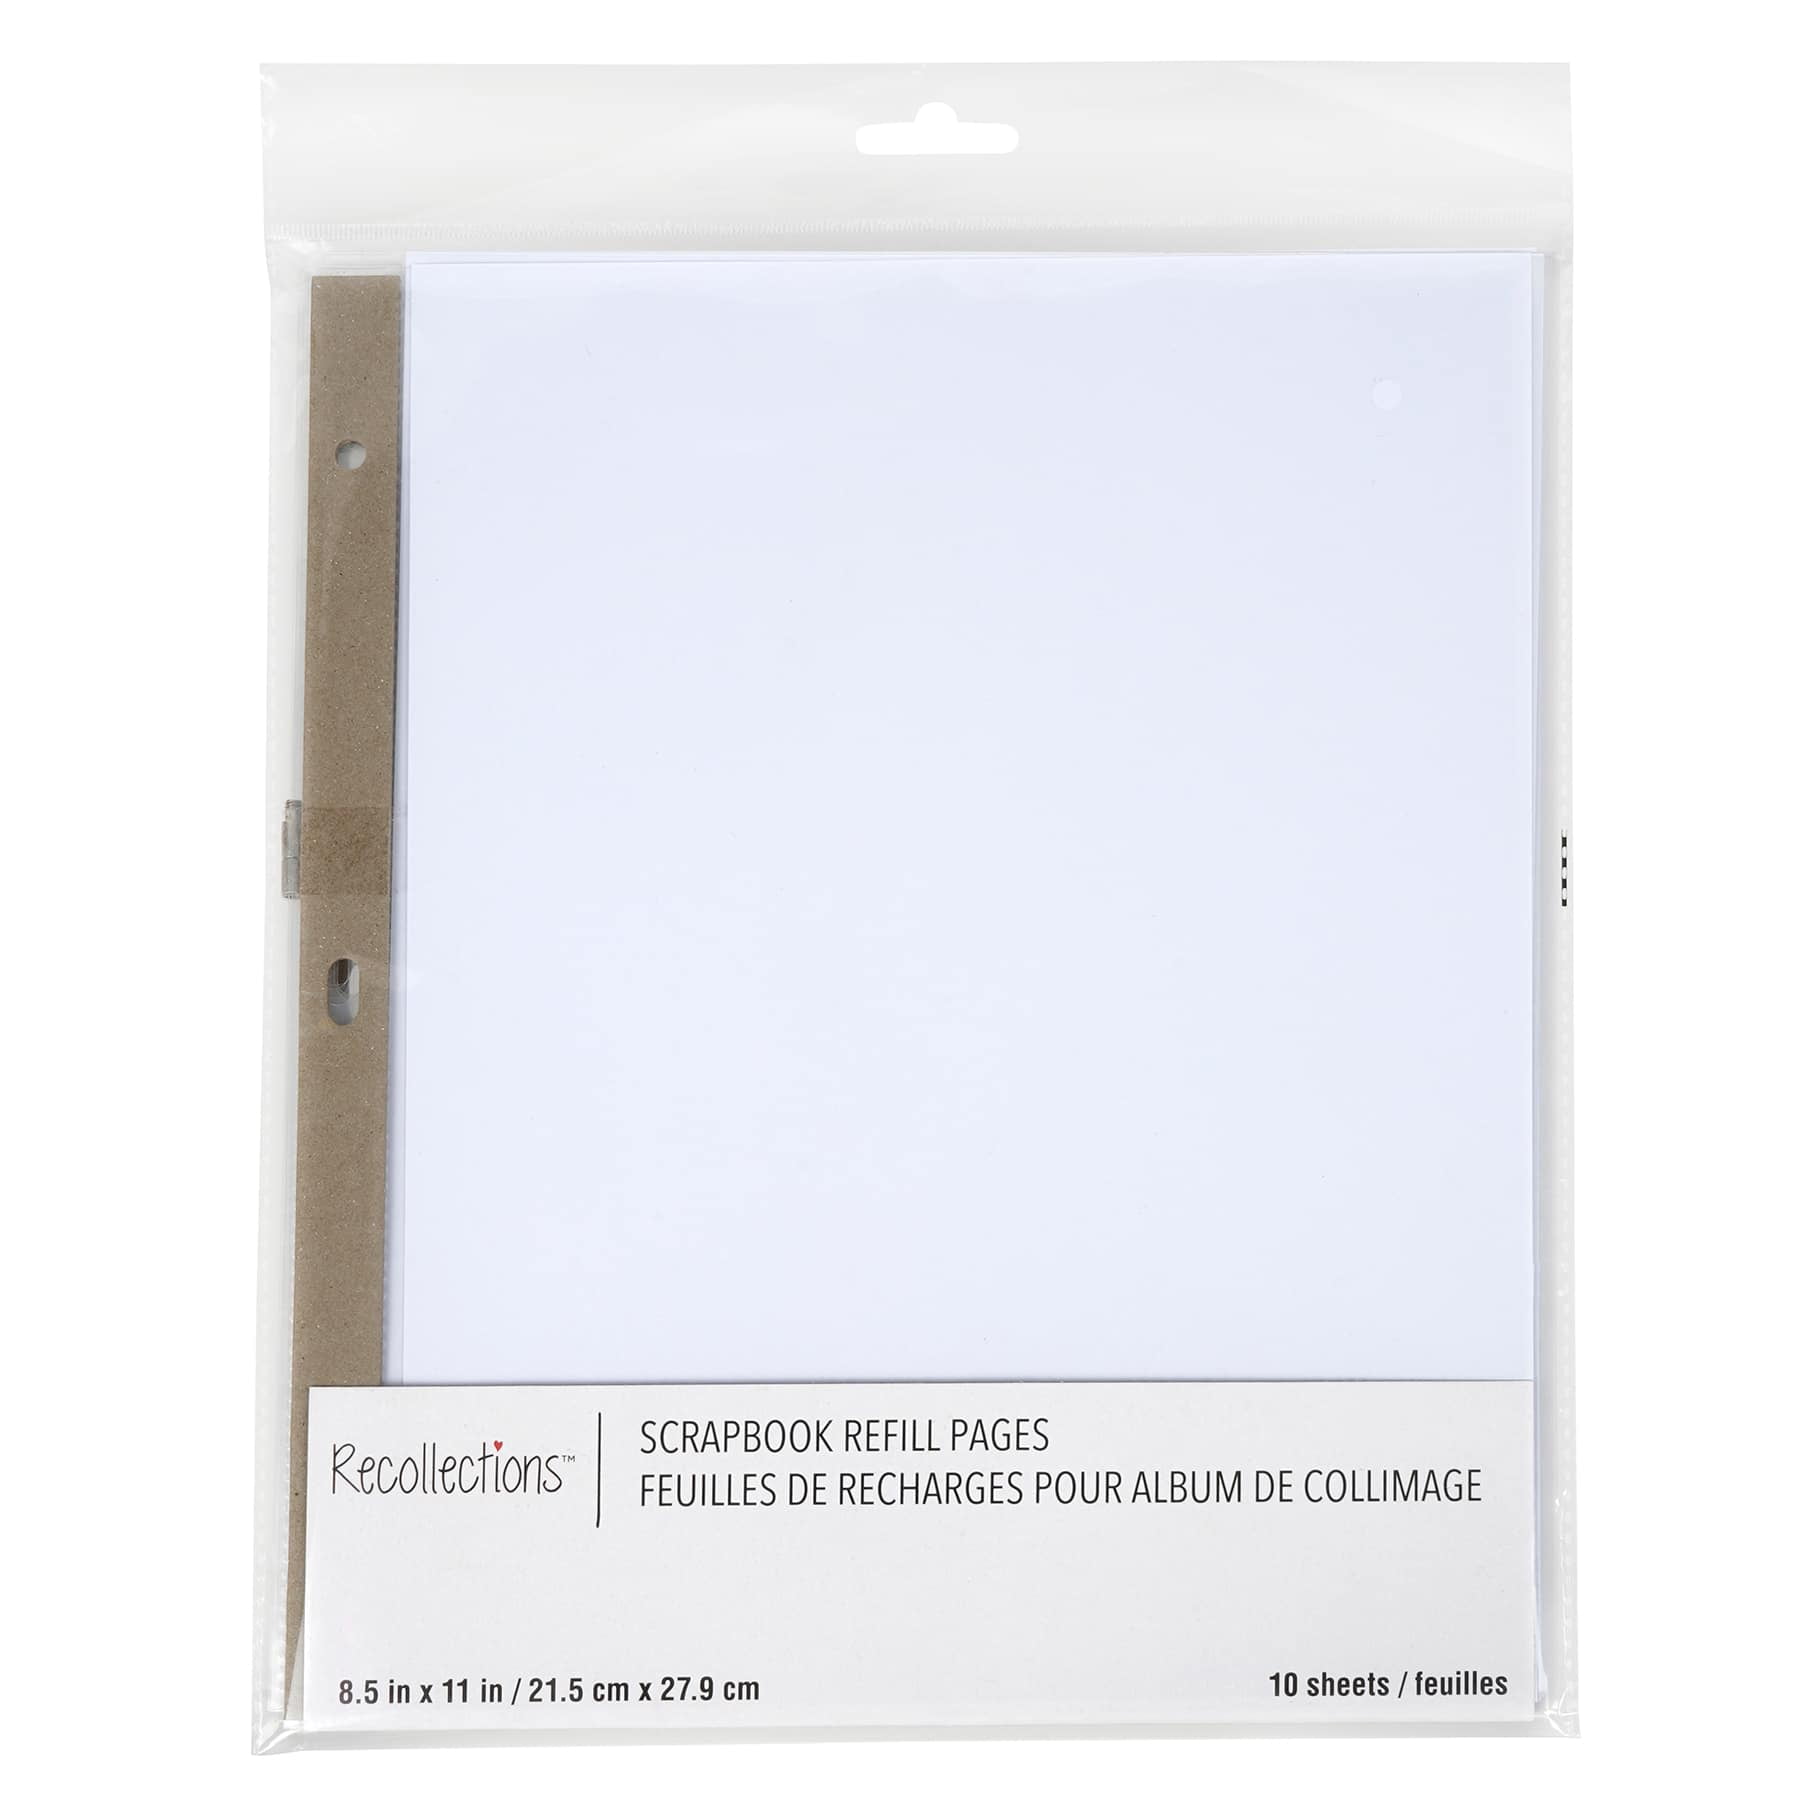 bord Fonetiek Vermelden 6 Packs: 20 ct. (120 total) 12" x 12" White Scrapbook Refill Pages by  Recollections™ - Walmart.com